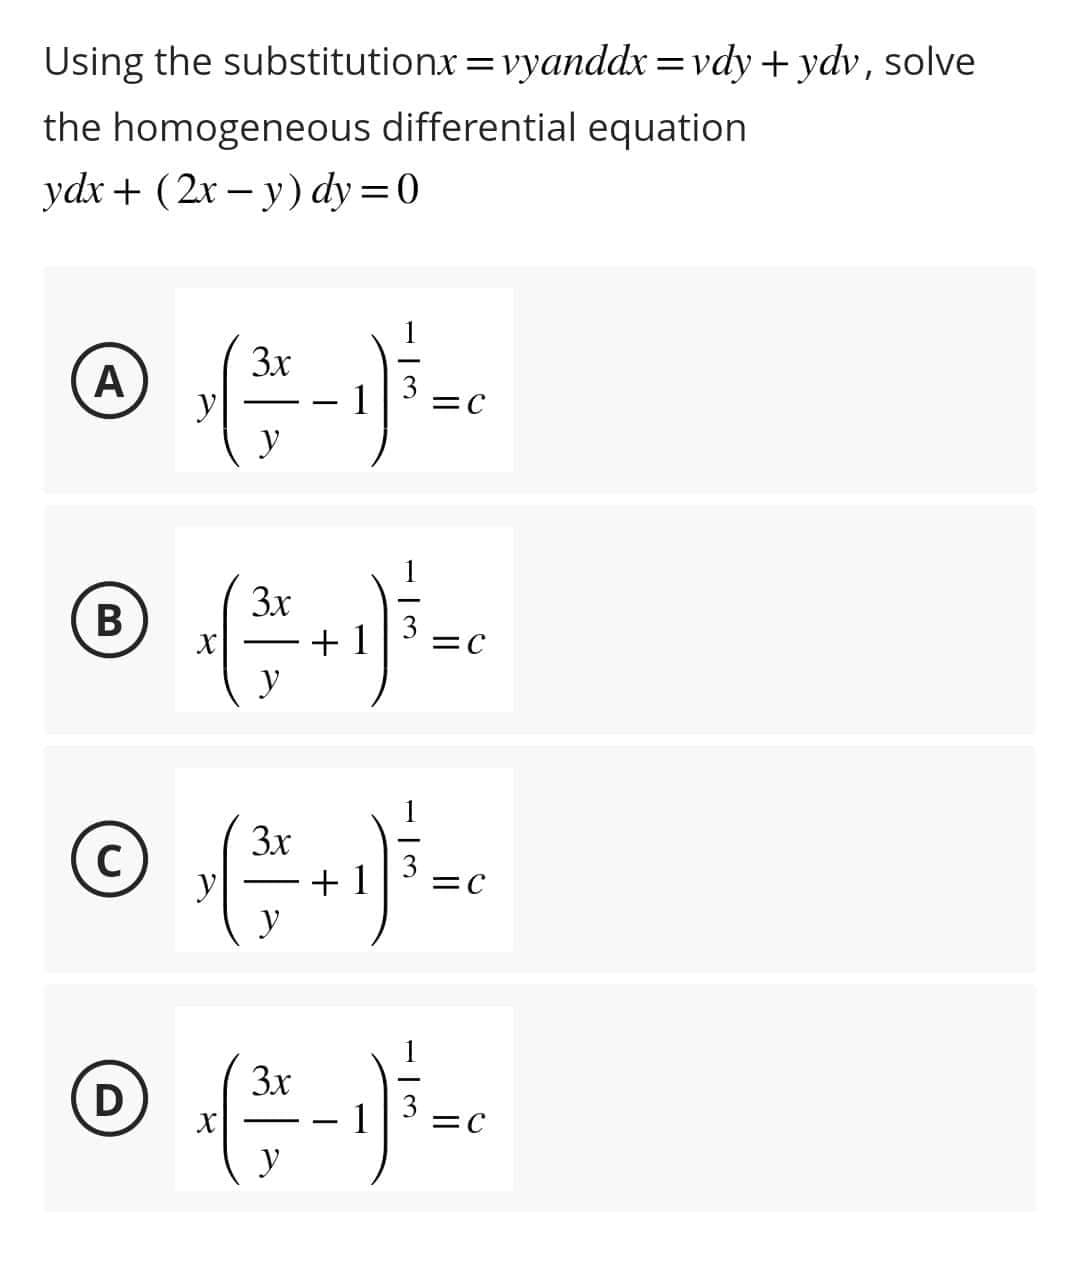 Using the substitutionx = vyanddx=vdy + ydv, solve
the homogeneous differential equation
ydx + (2x - y) dy=0
3x
@ √( ² ² - 1) ² = 0
A
y
y
3x
® + ( + ² + ¹ ) ³ = ²
B
=C
y
3x
© ‚ (²3²+ + ₁] ² = ₁
3
y
=C
y
D
3x
y
3
1 =C